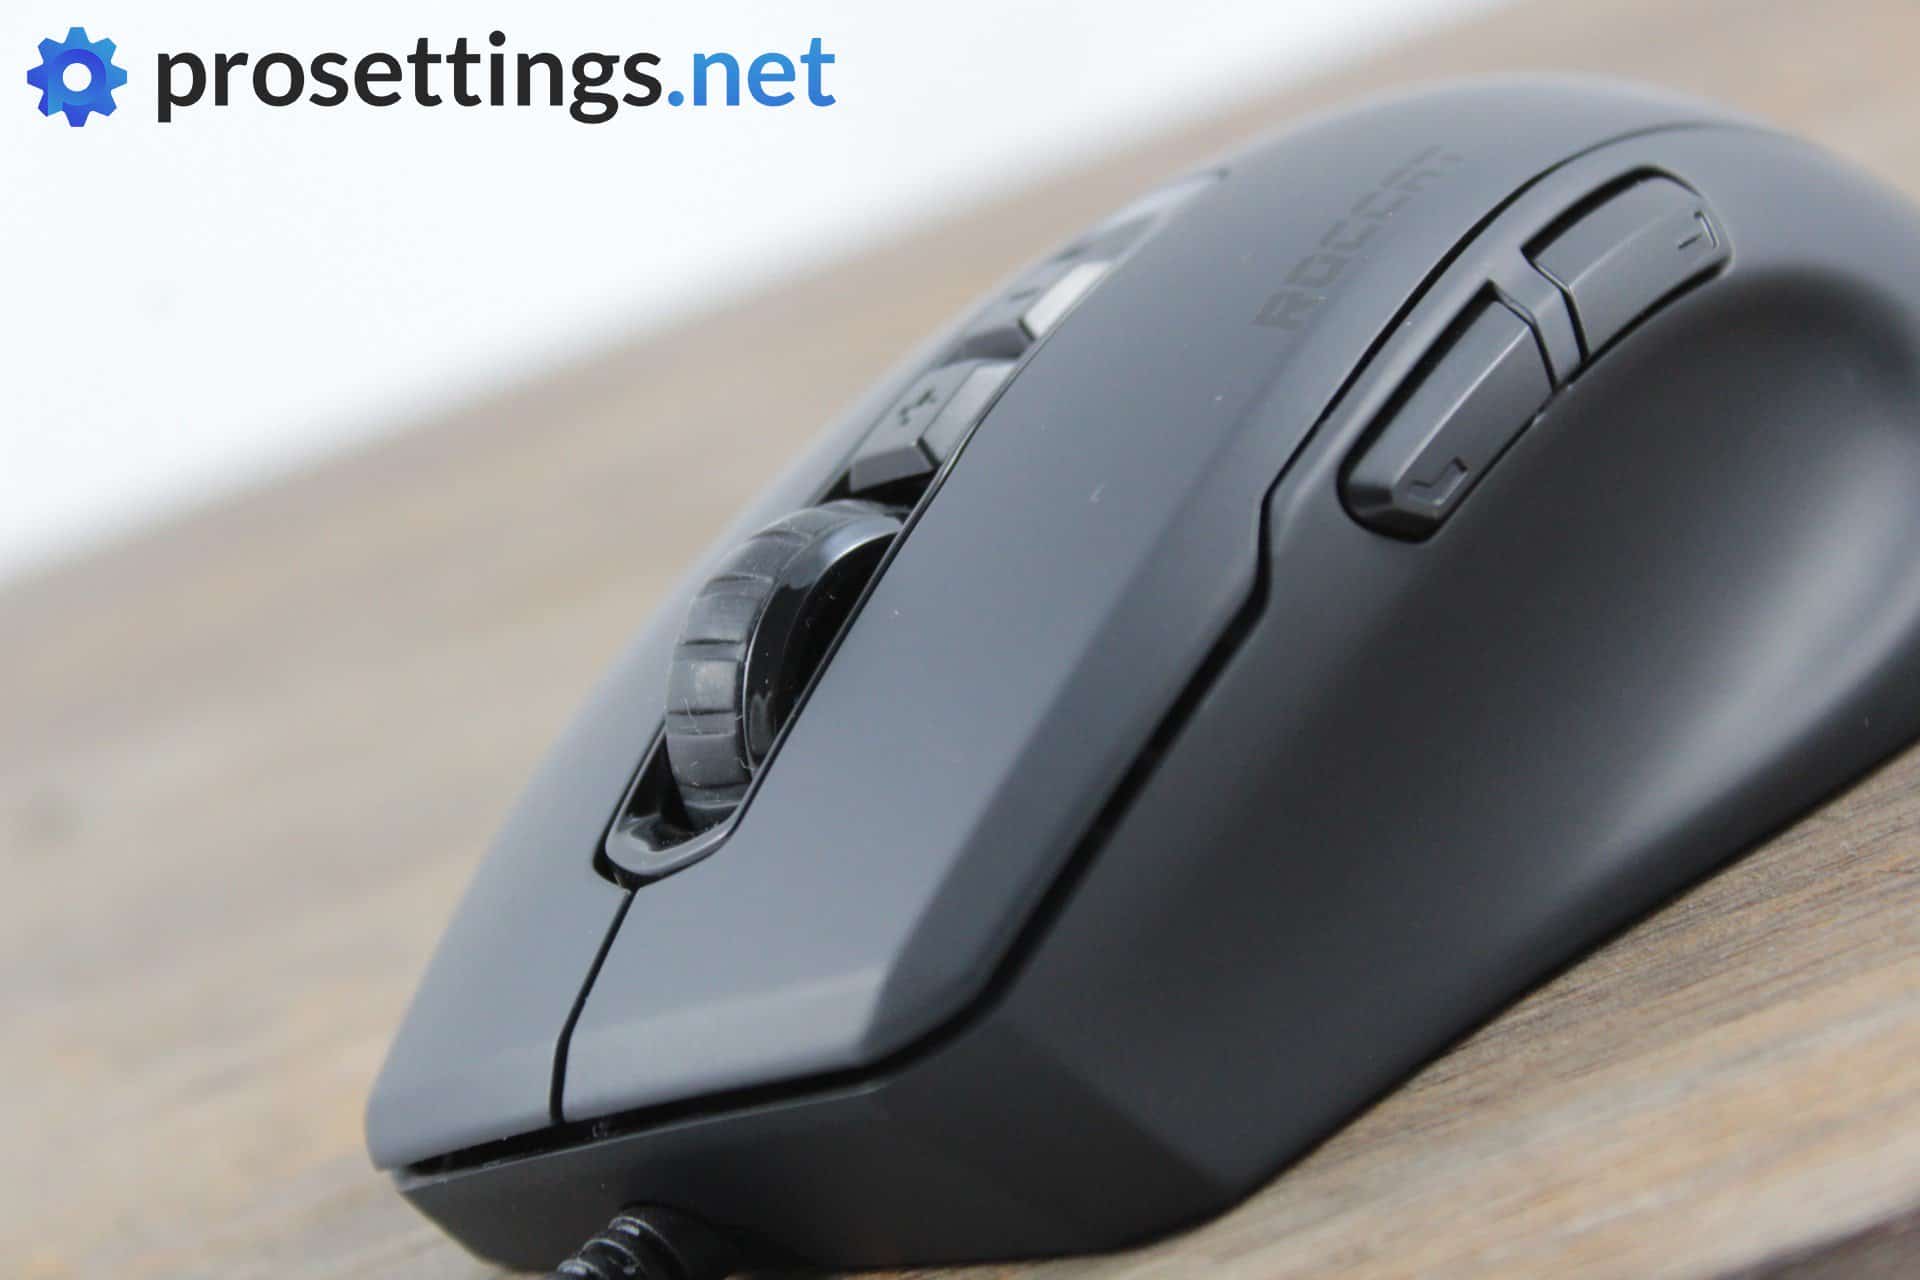 Roccat Kone Pure Ultra Mouse Review